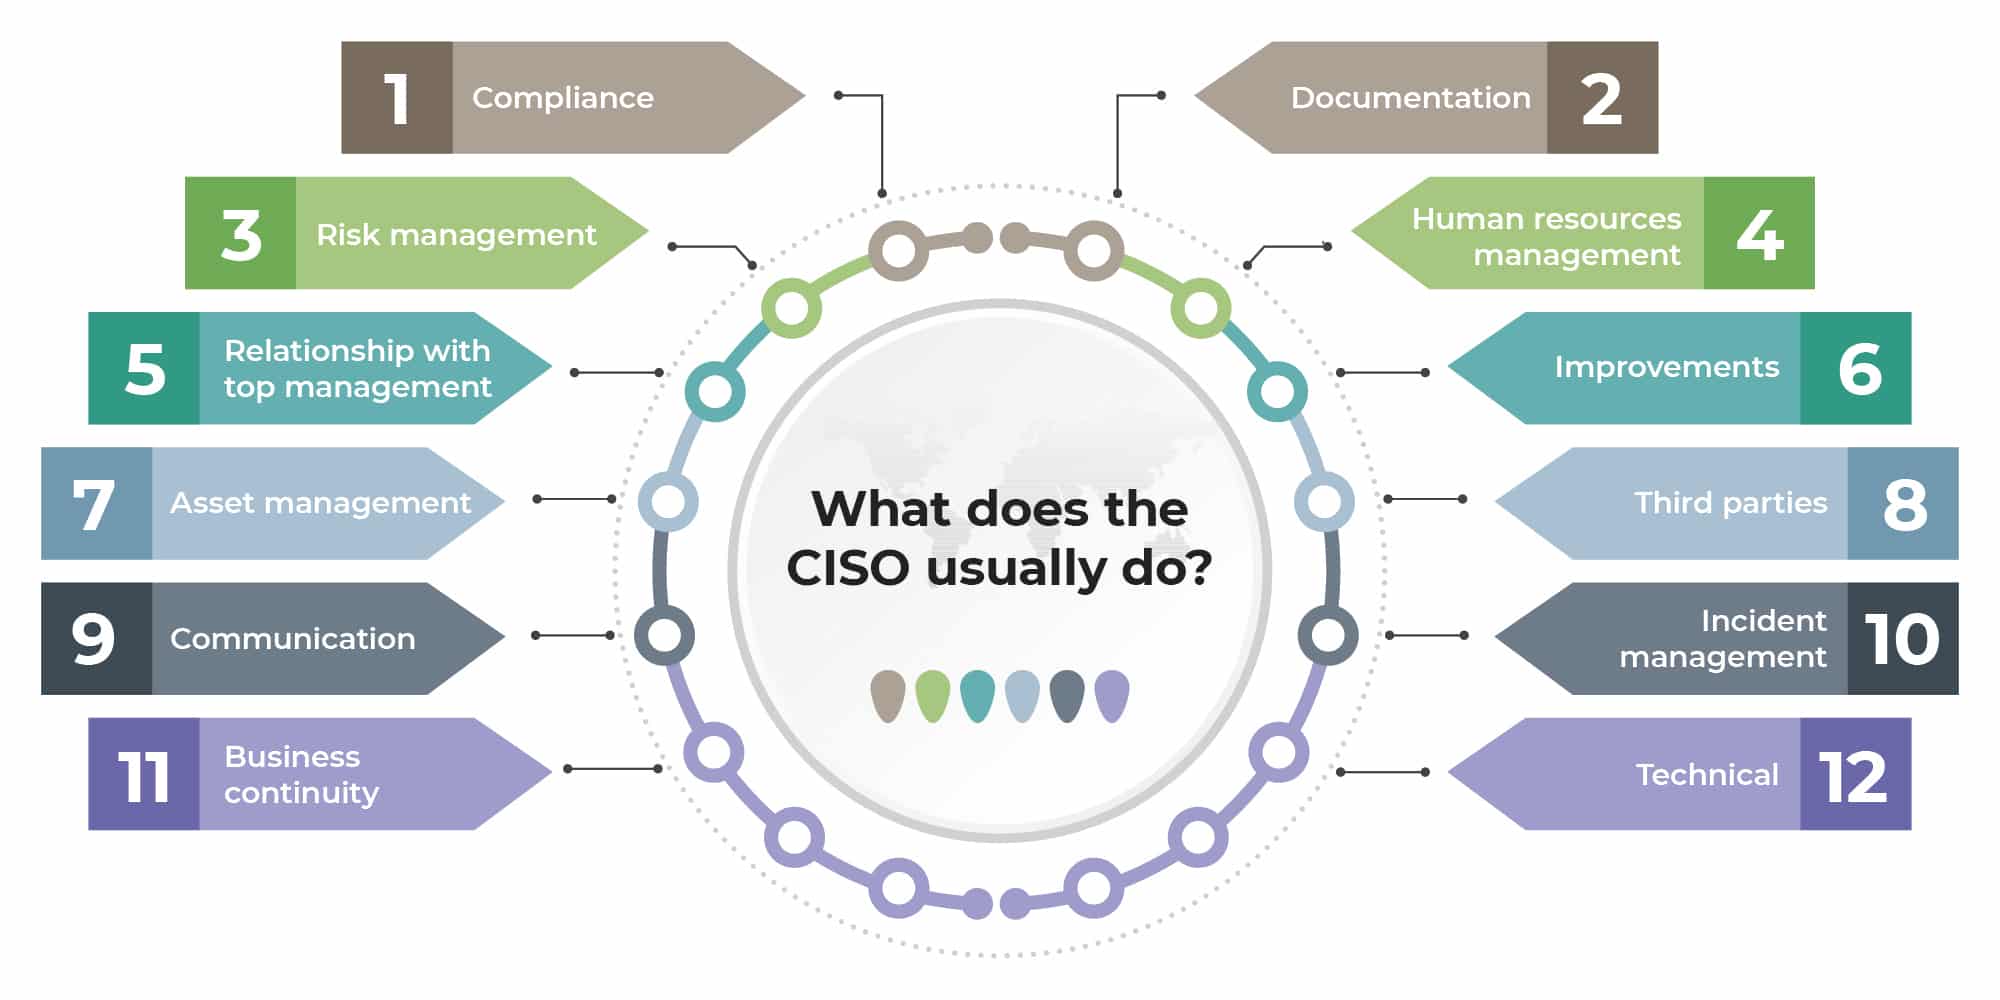 CISO roles and responsibilities in ISO 27001